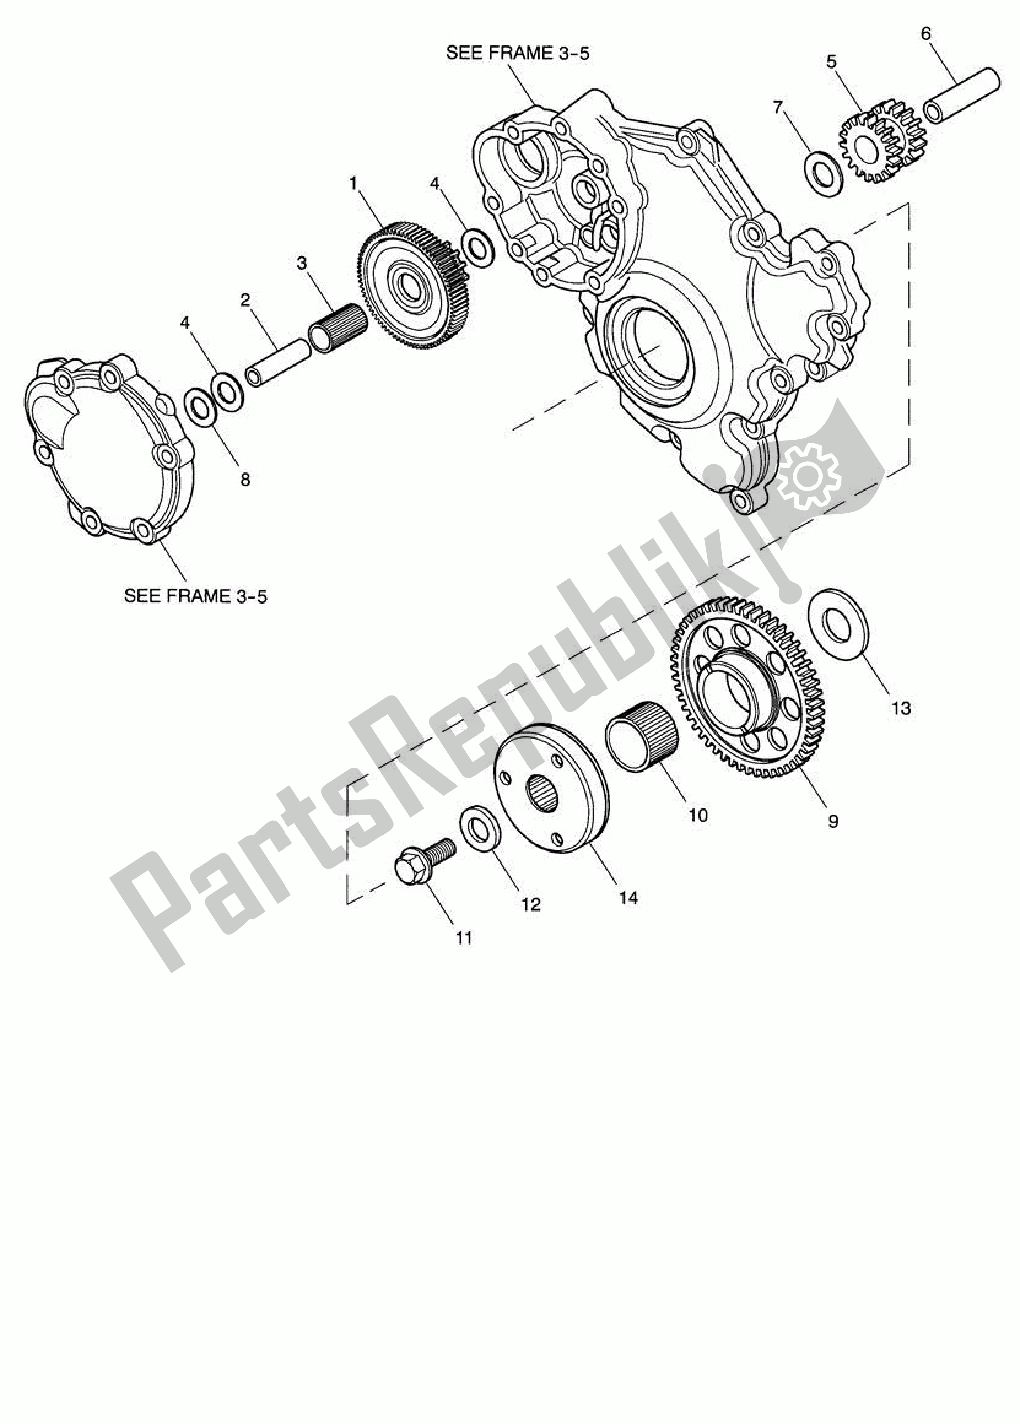 All parts for the Starter Drive Gears of the Triumph Speed Triple 1050 2008 - 2012